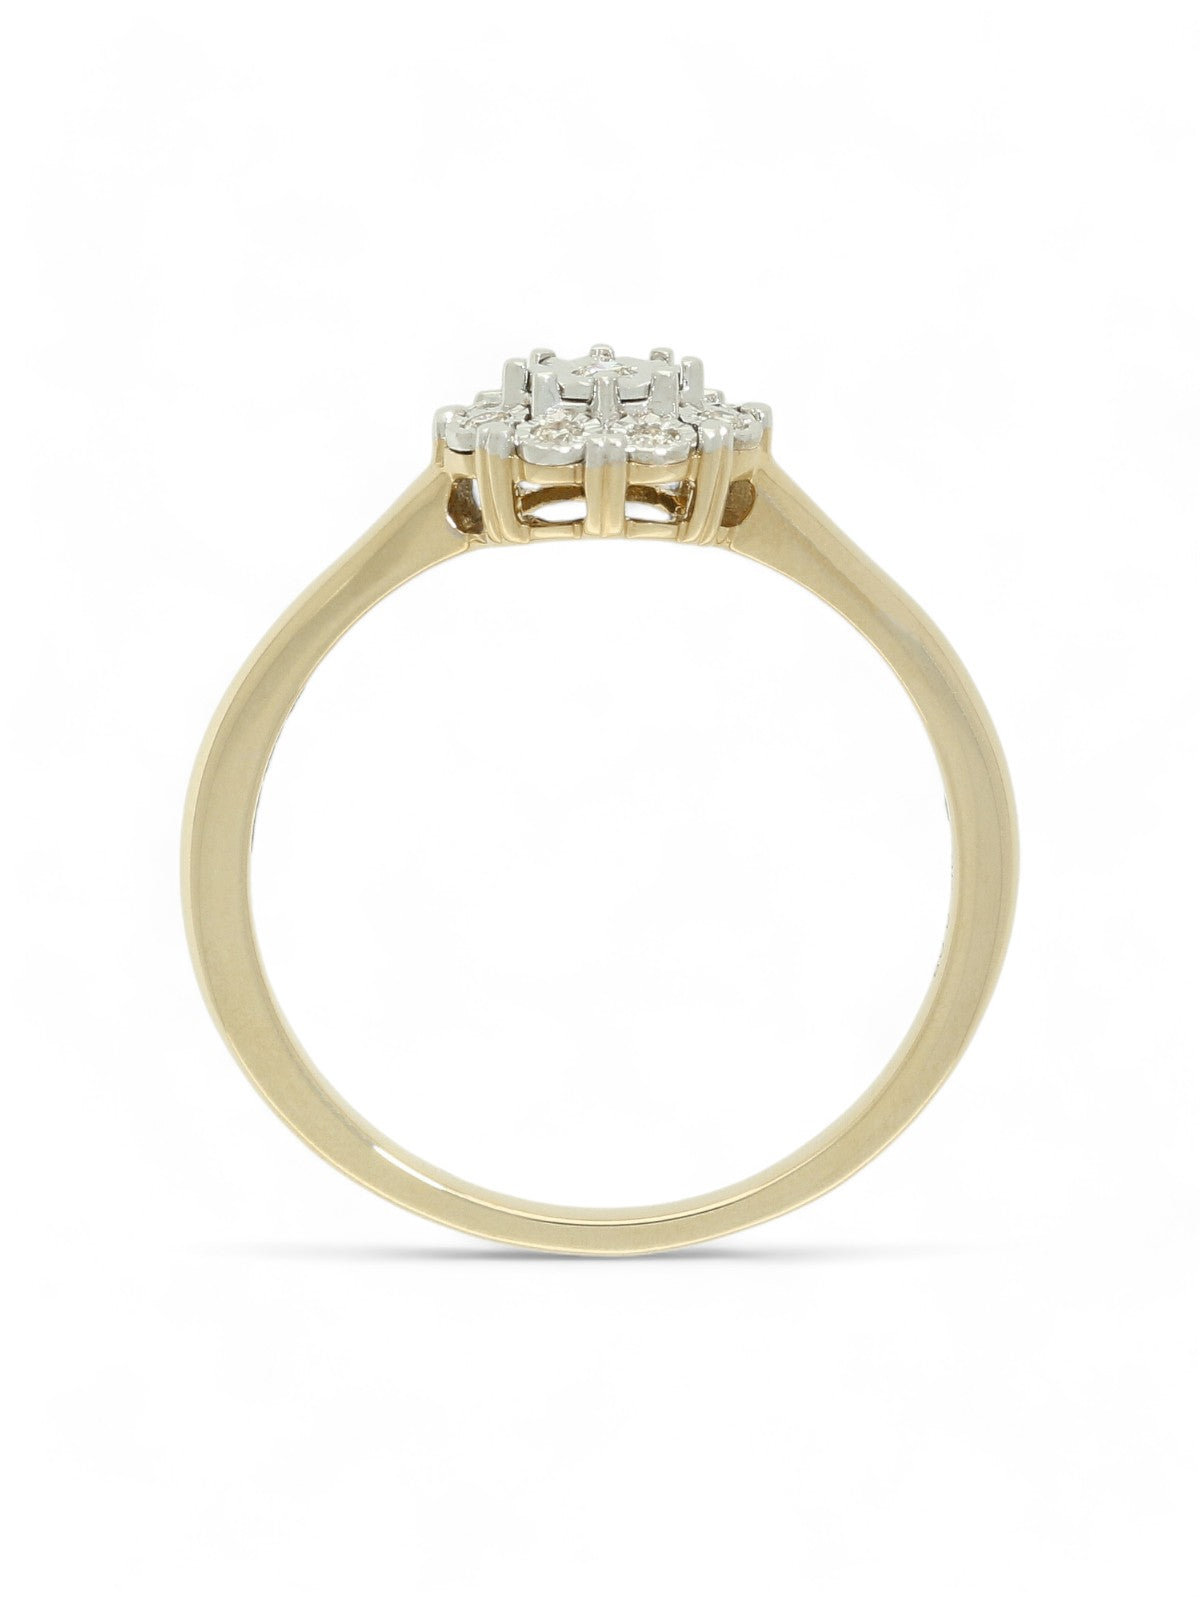 Diamond Floral Cluster Miracle Set Ring in 9ct Yellow Gold